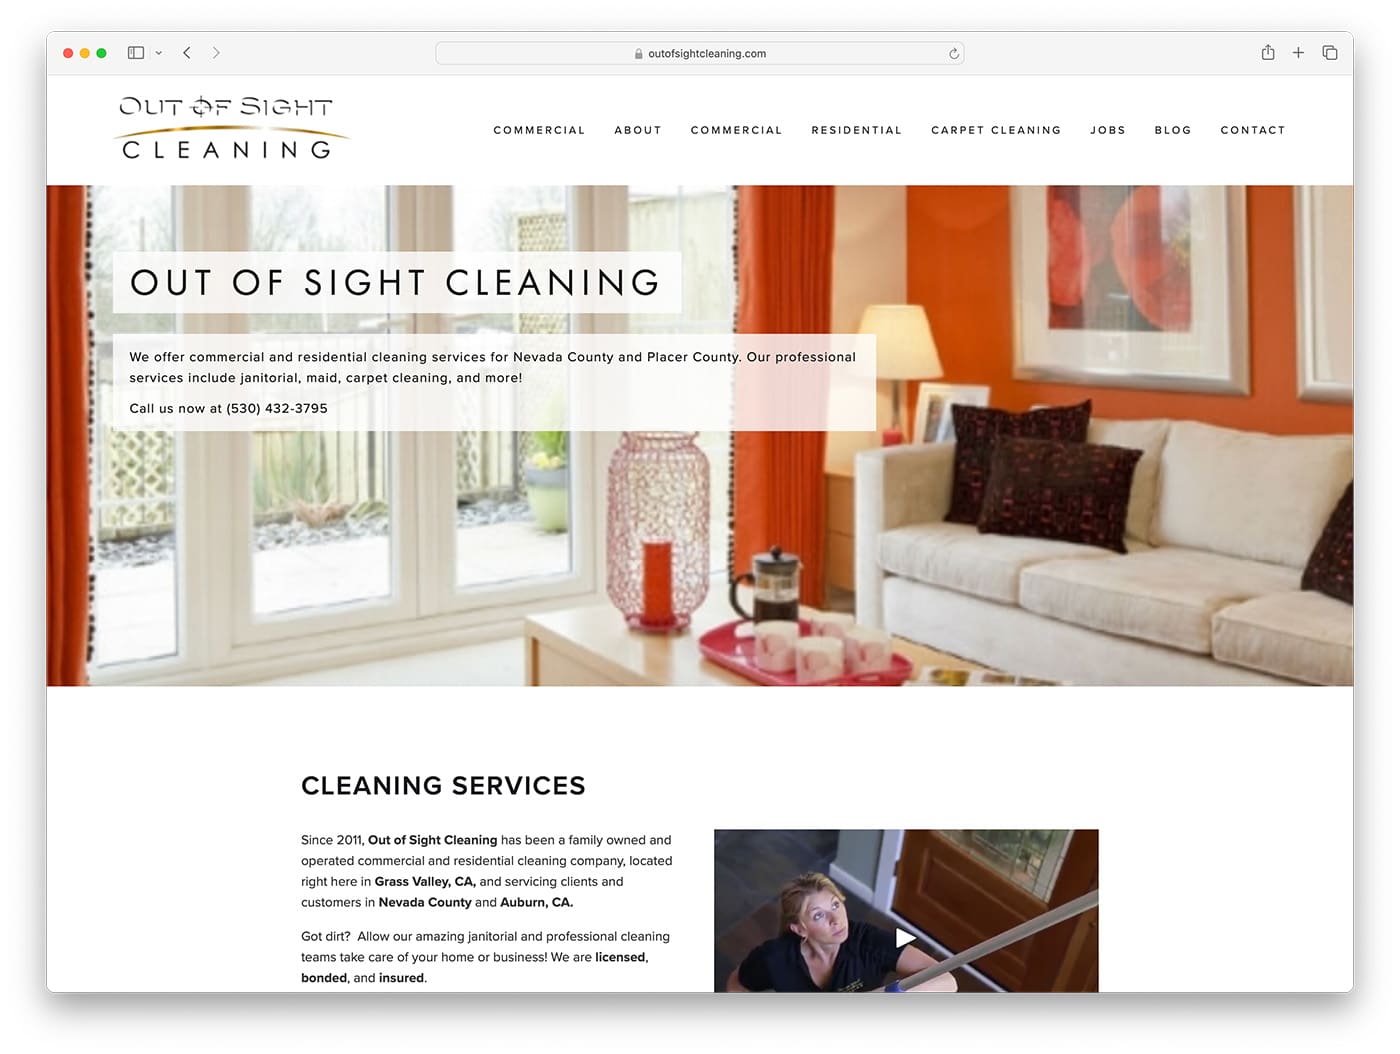 Out of Sight Cleaning company website